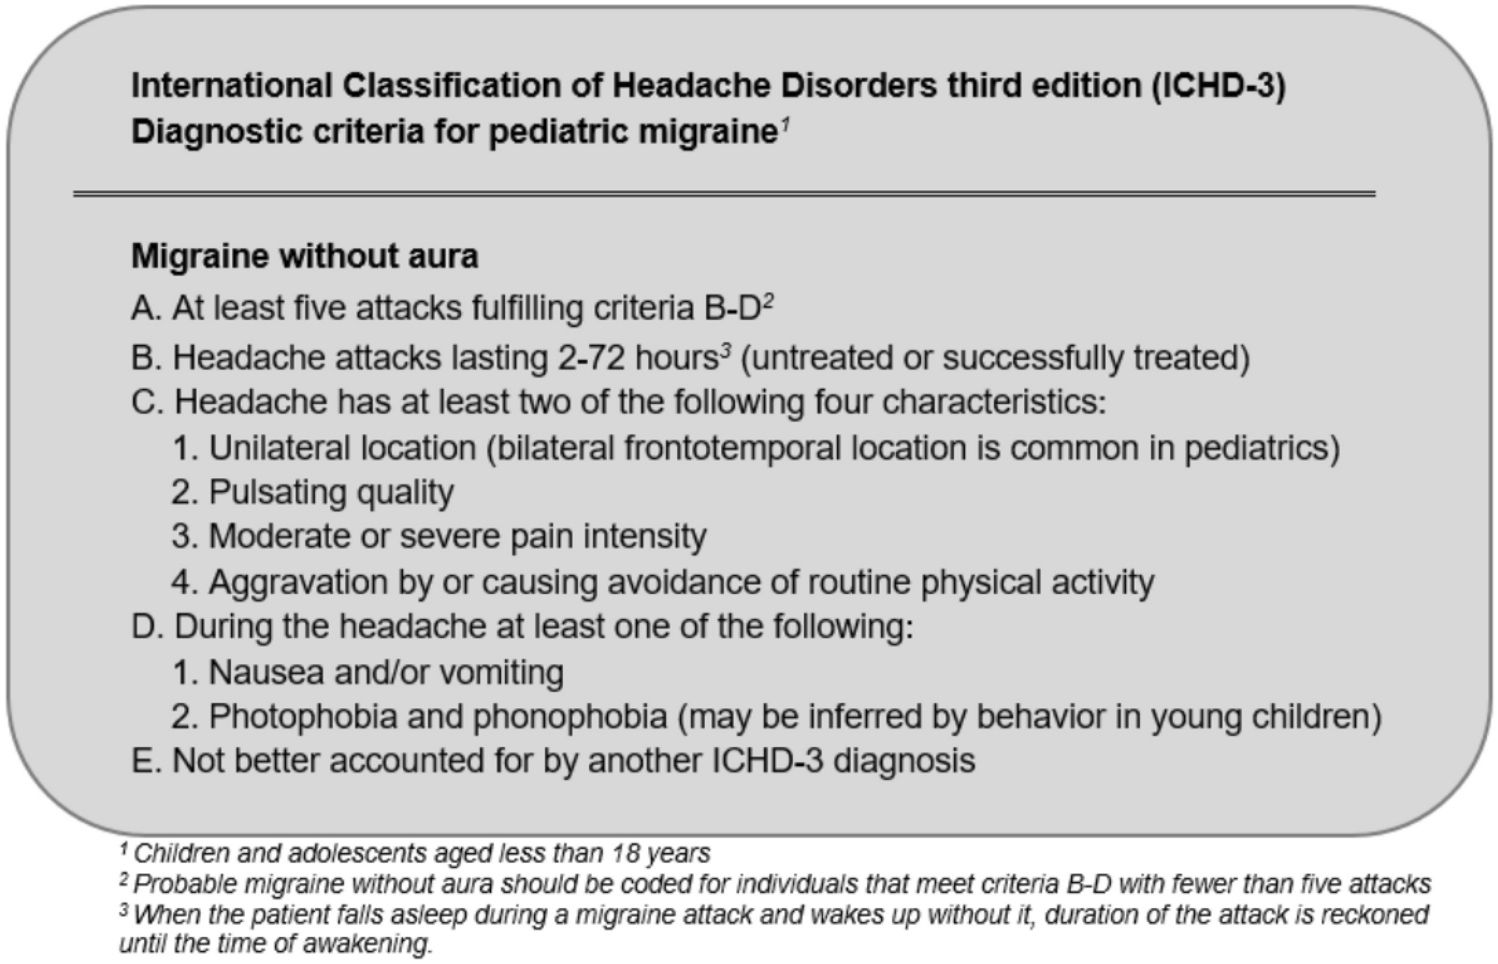 Triptans in the Acute Migraine Management of Children and Adolescents: An Update